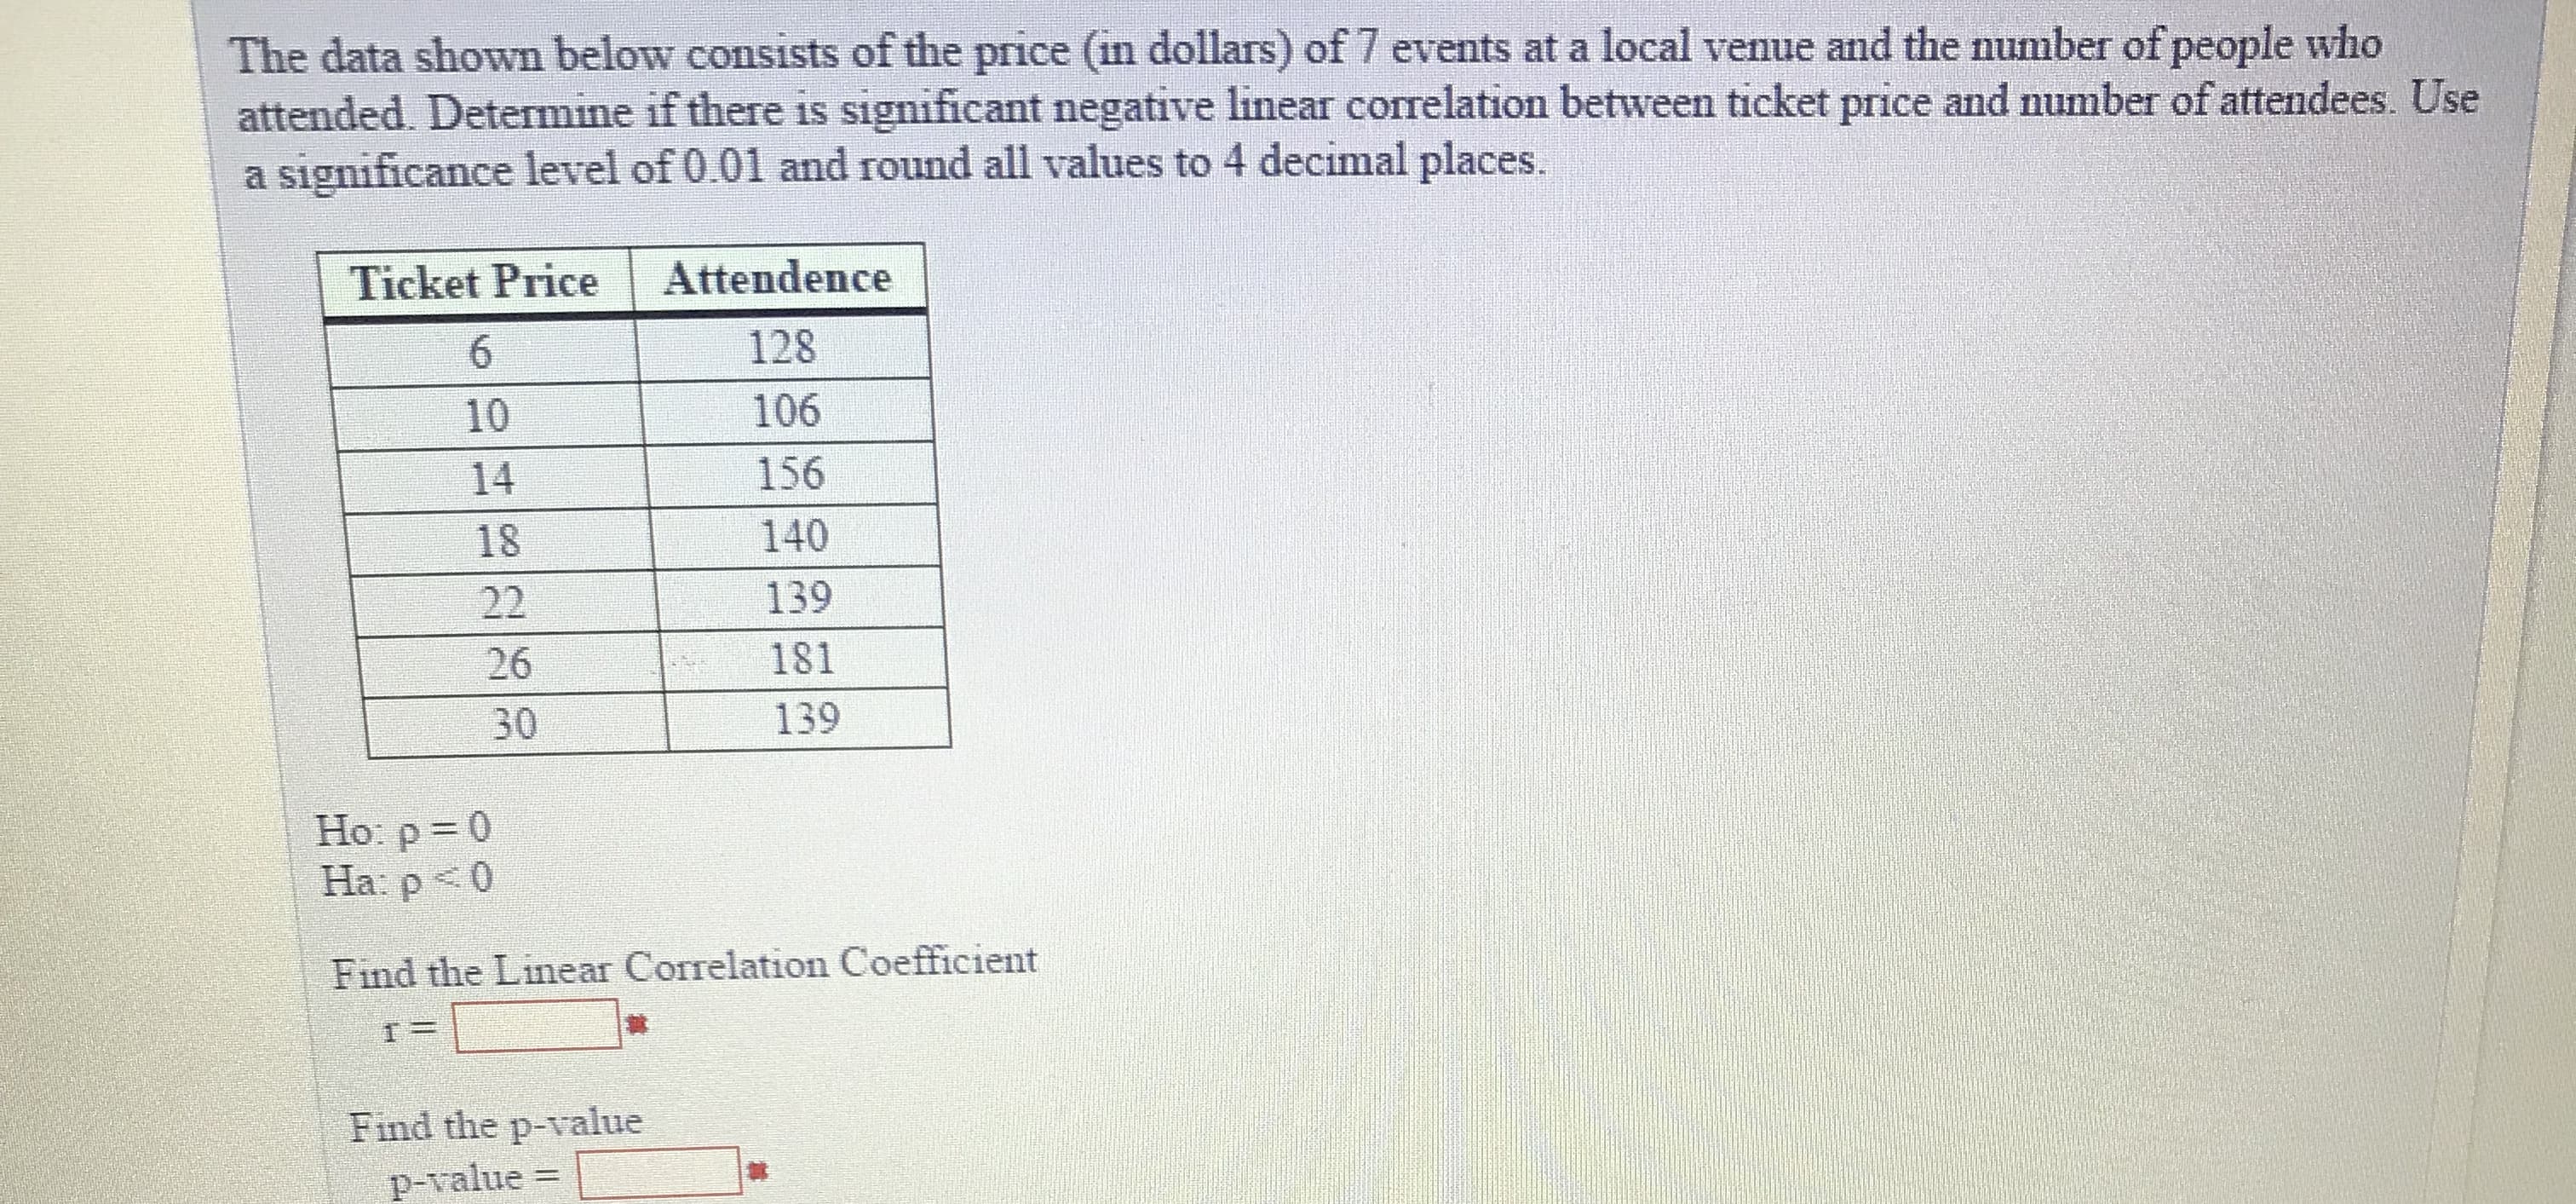 The data shown below consists of the price (in dollars) of 7 events at a local venue and the number of people who
attended. Determine if there is significant negative linear correlation between ticket price and number of attendees. Use
a significance level of 0.01 and round all values to 4 decimal places.
Ticket Price Attendence
10
18
26
128
106
156
140
139
181
139
30
Ho: p=0
Ha: po
Find the Linear Correlation Coefficient
Find the p-value
韎
p-value
